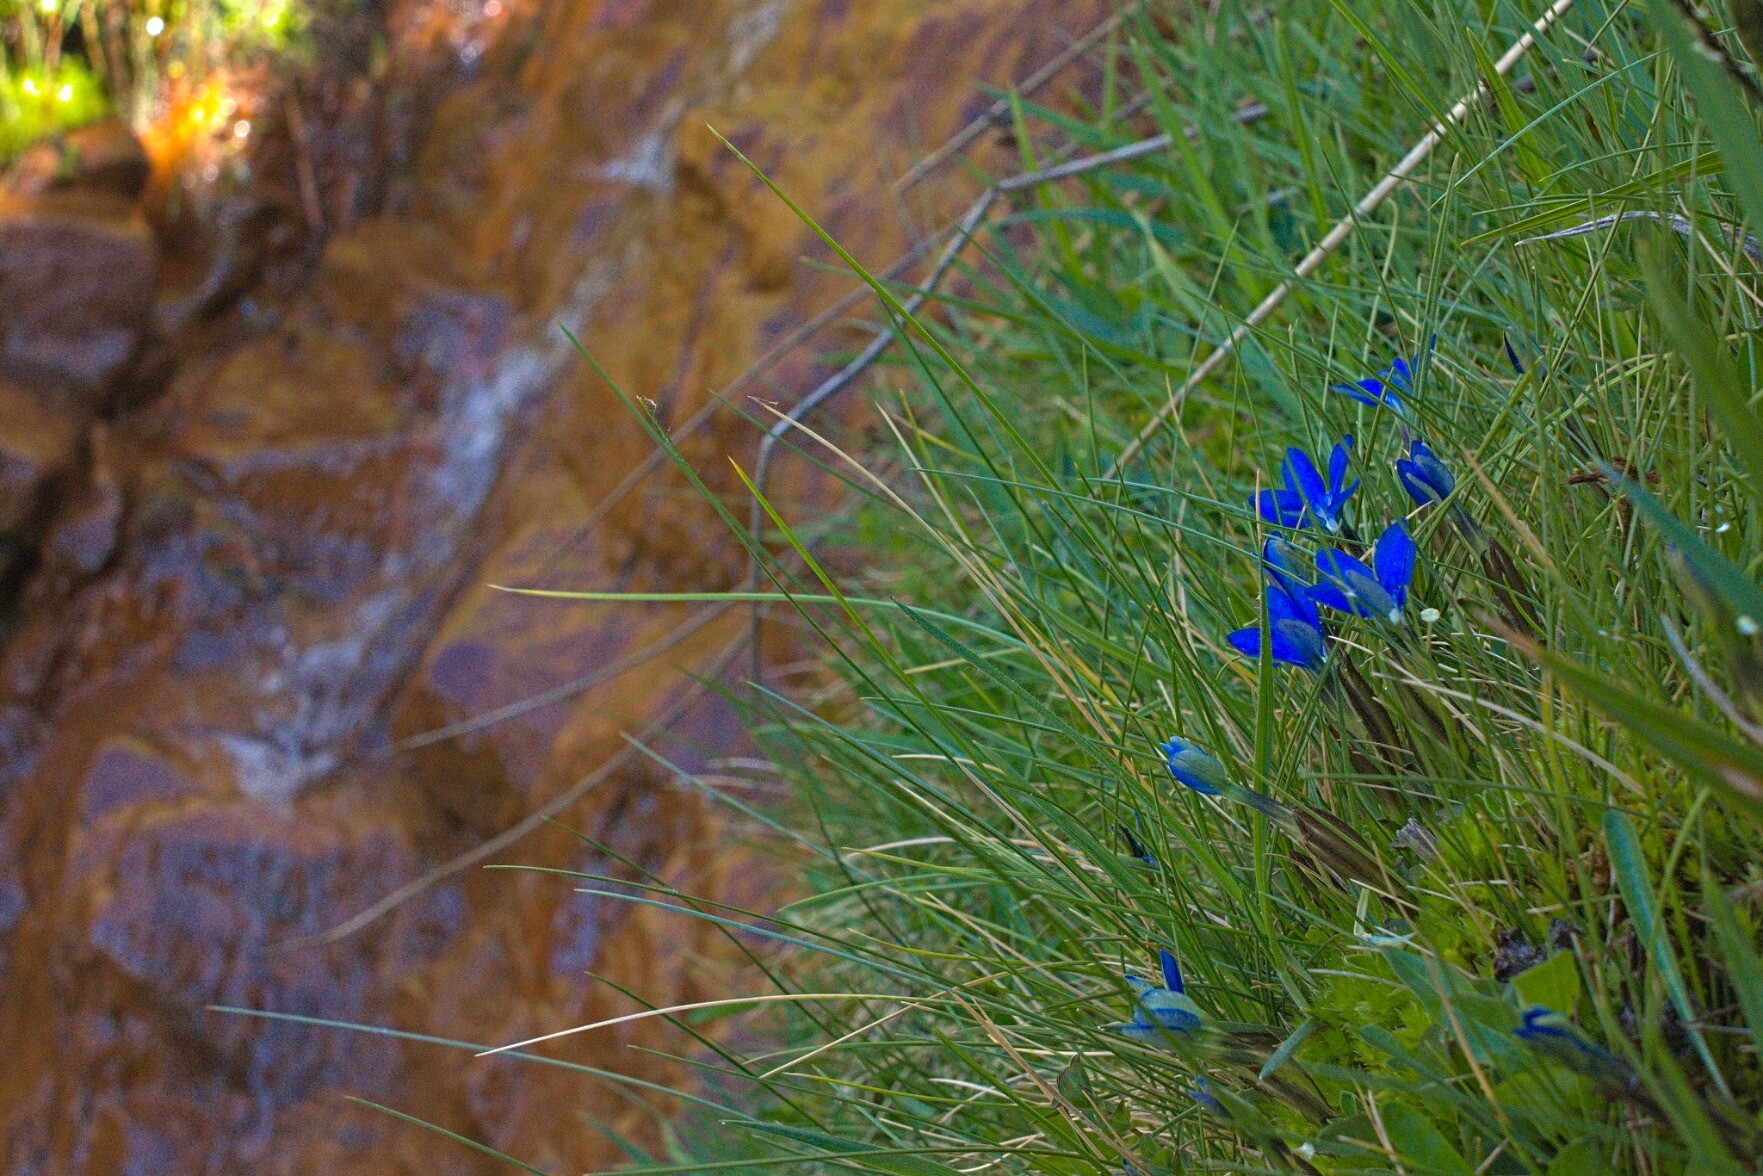 On the right some bright blue flowers (Gentians). To the left and blurred is an iron rich mountain stream